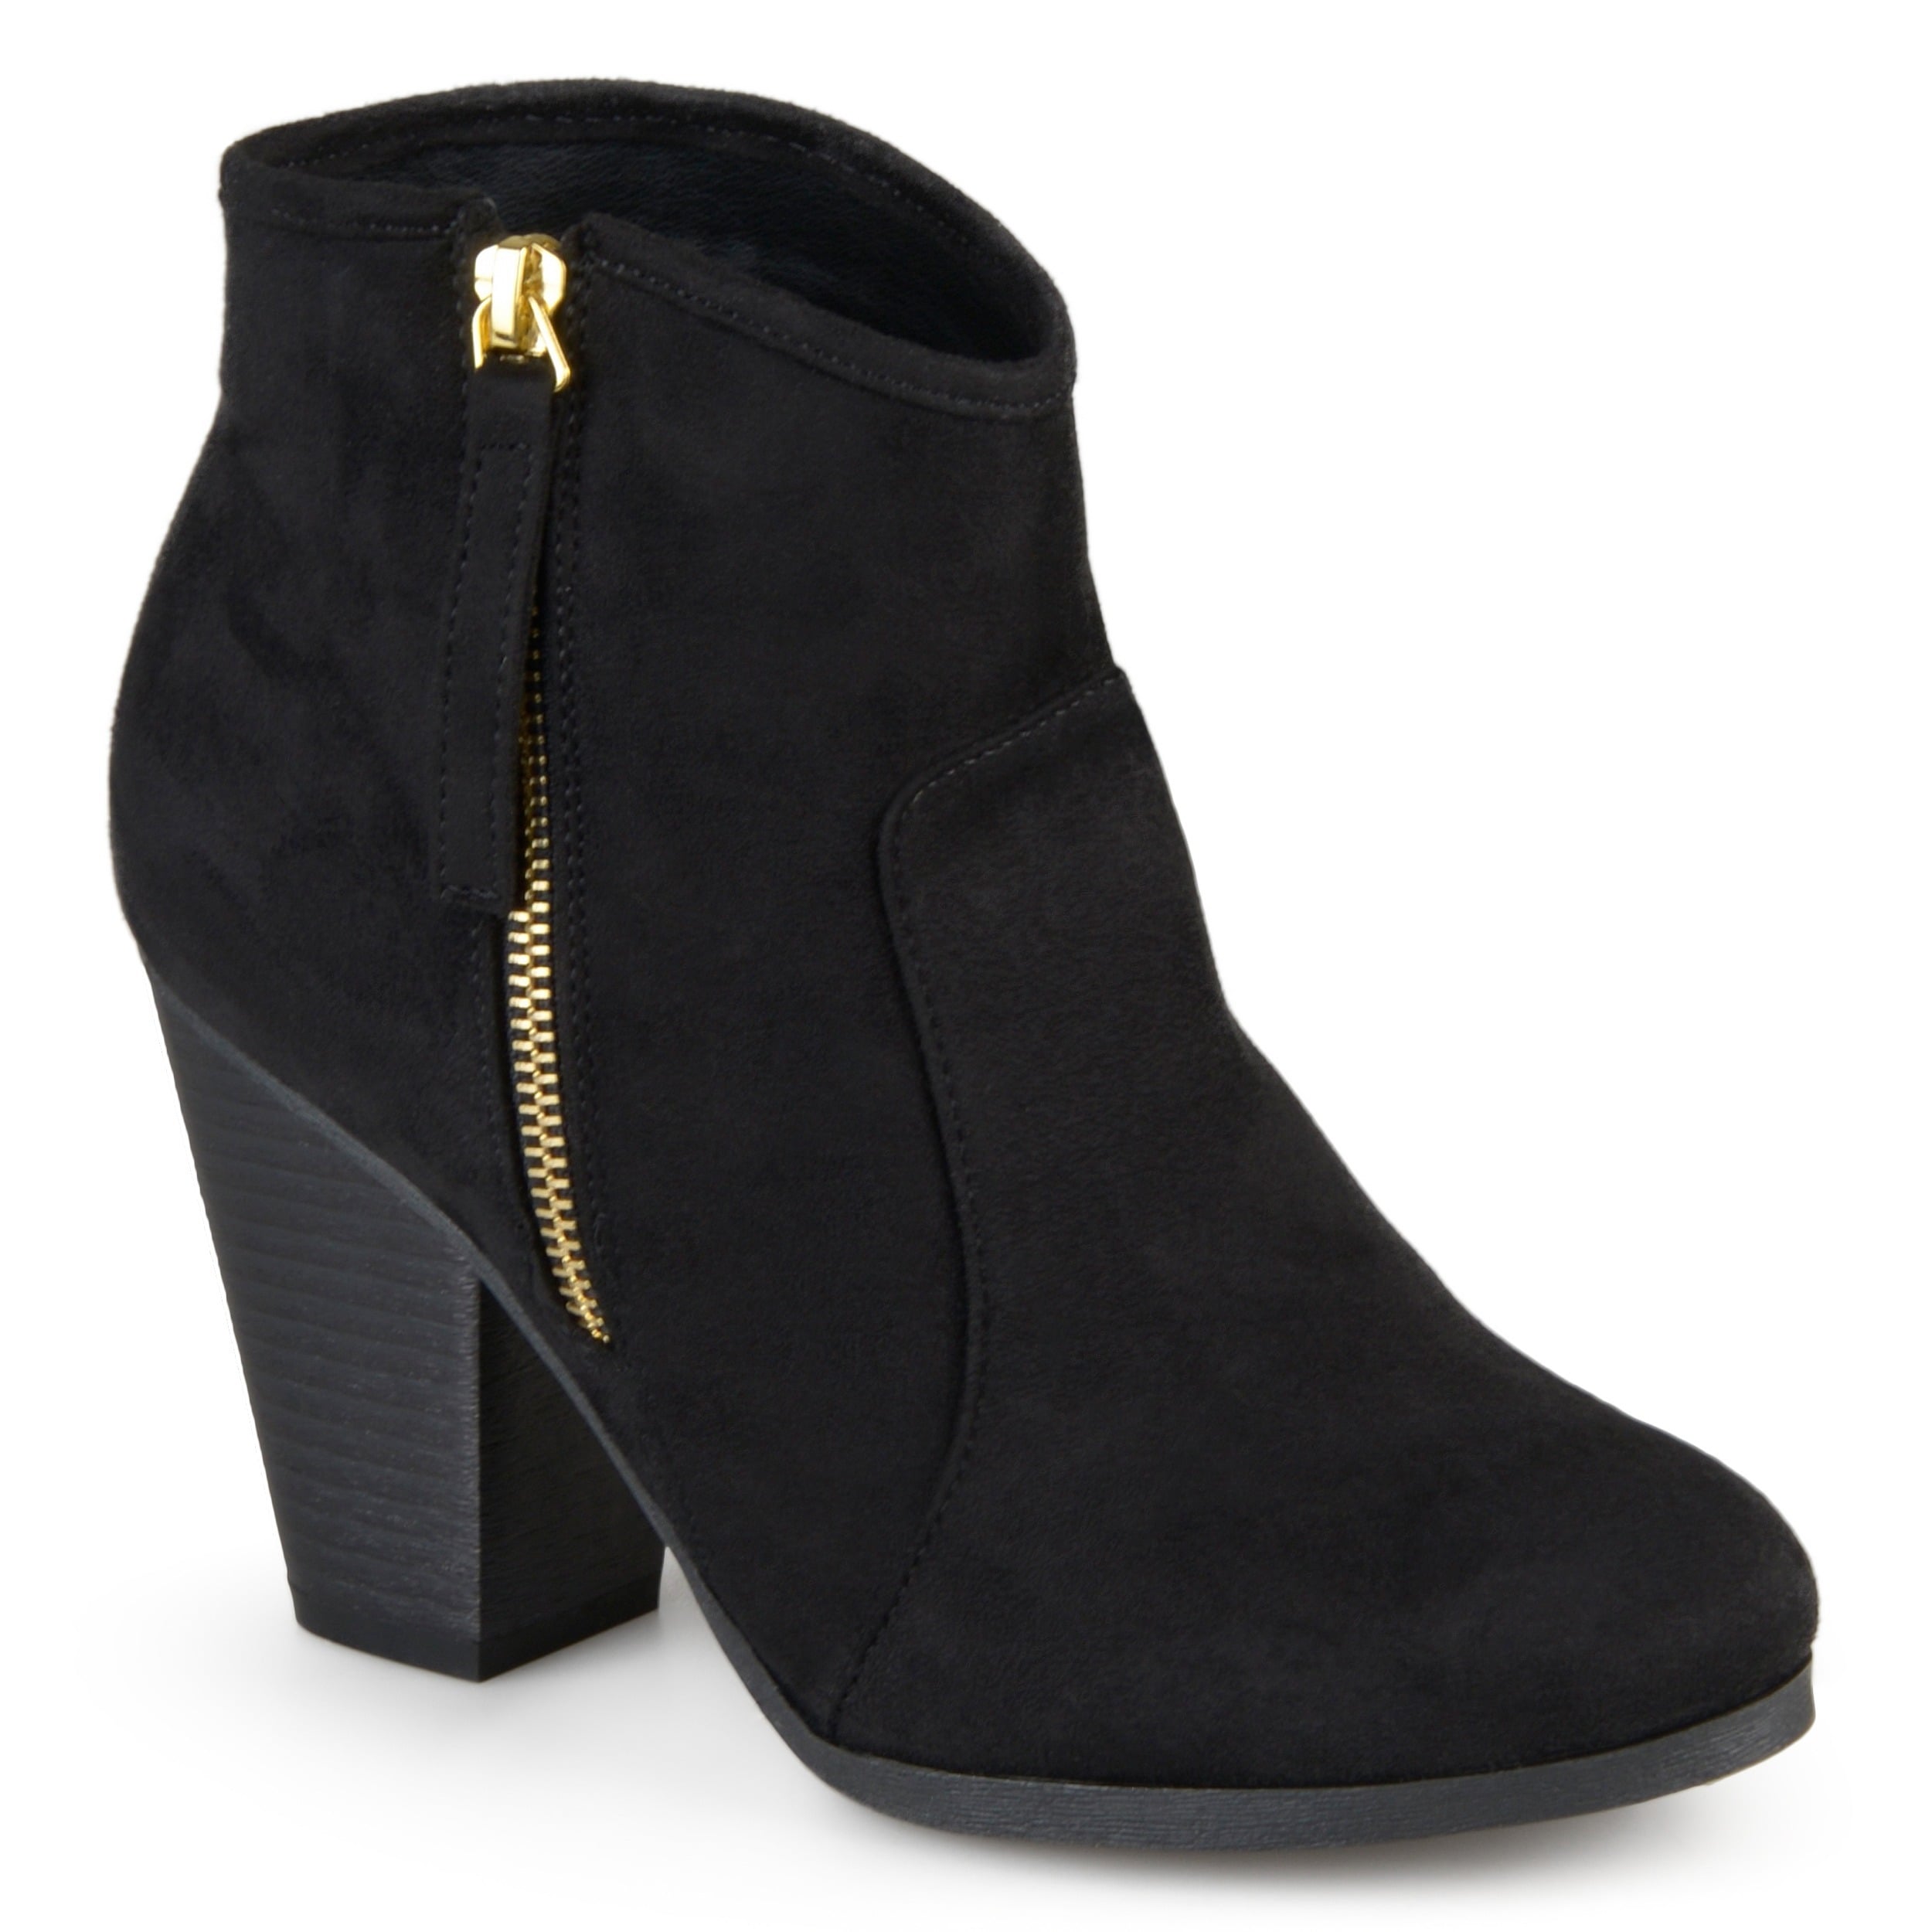 High Heel Faux Suede Ankle Boots 